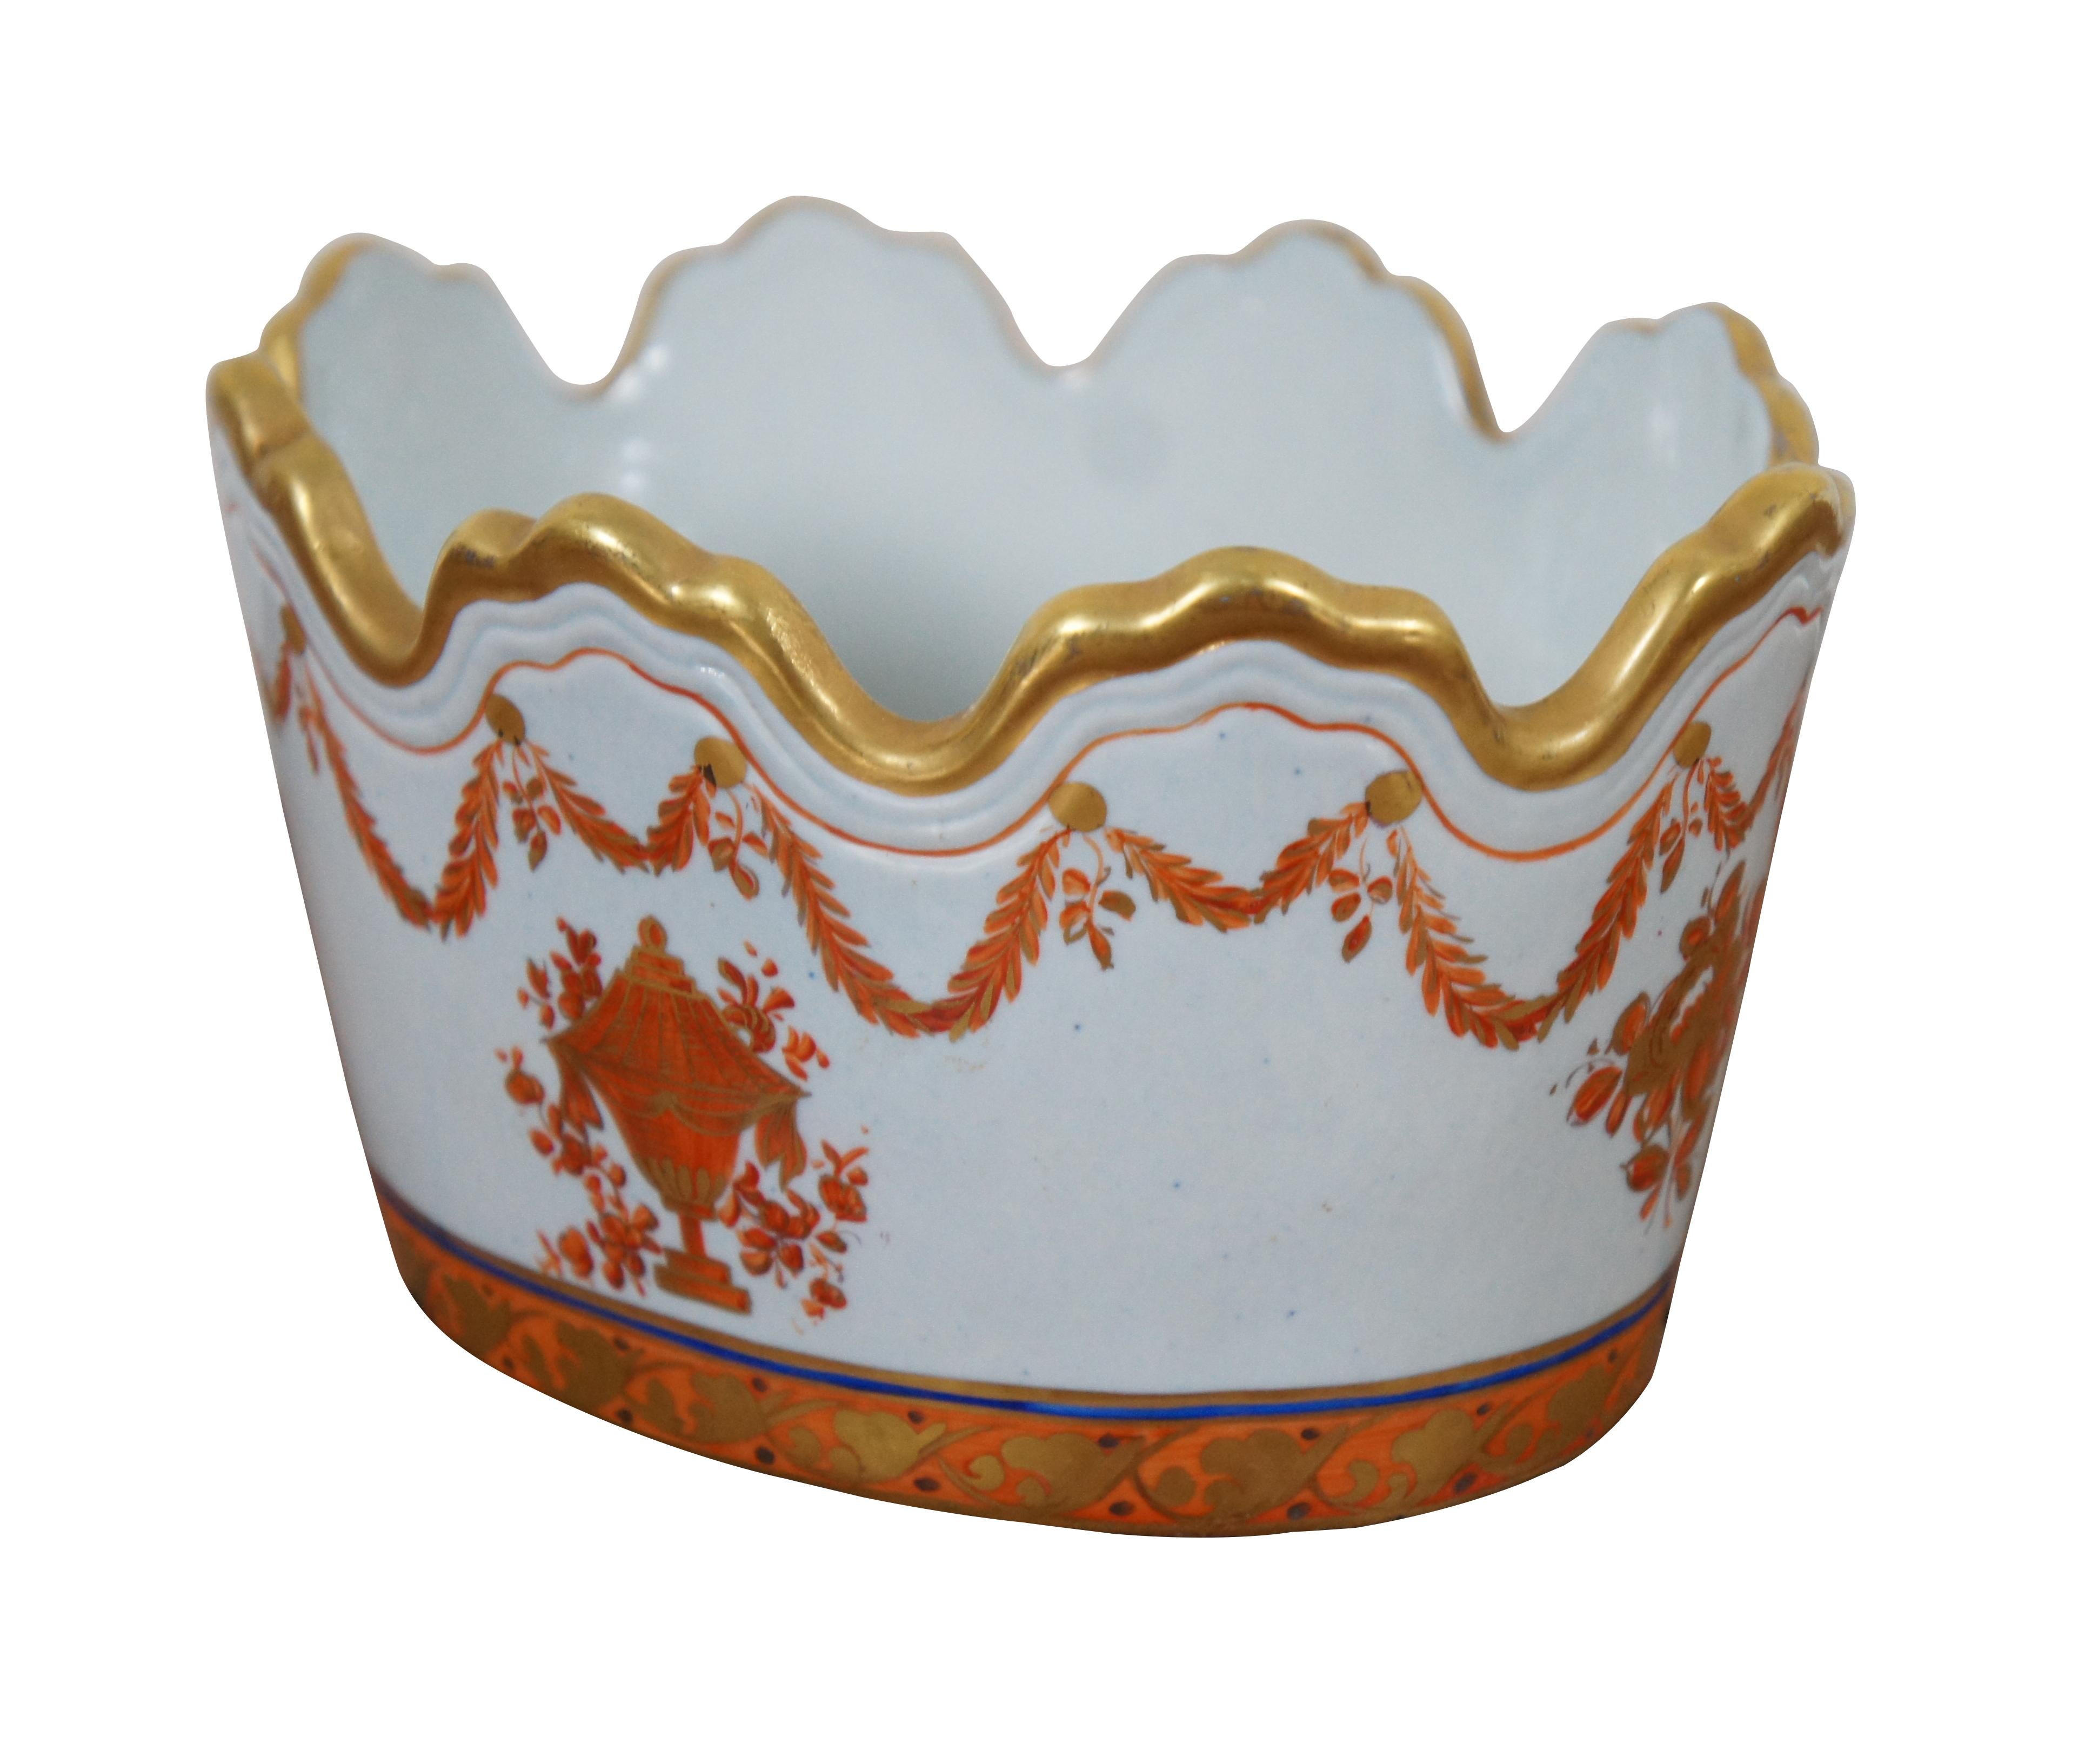 Lowestoft Reproduction Monteith nut / candy dish / cachepot by Mottahedeh featuring an oval form with gilded scalloped crown shaped edge and painted with orange neoclassical foliage with central trophy urn and cobalt blue band. Measure: 6